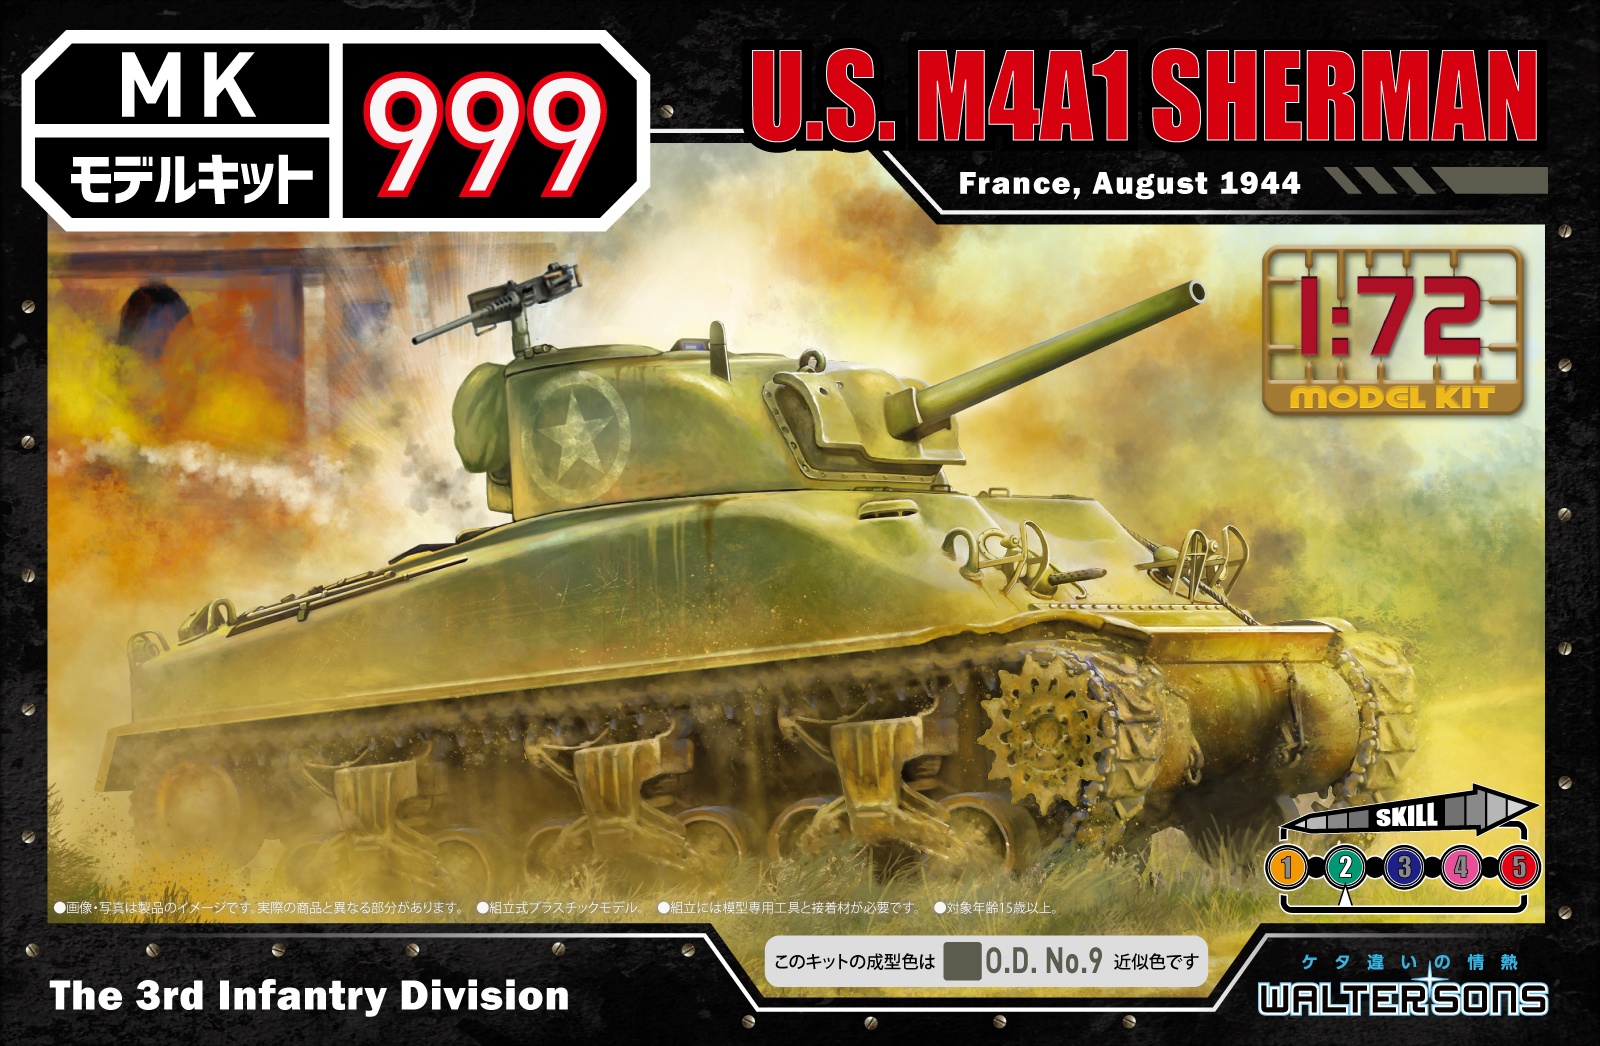 M4a1 Sherman Normandy 1944 Die Cast Toy 1 72 for sale online Forces of Valor Tank U.s 